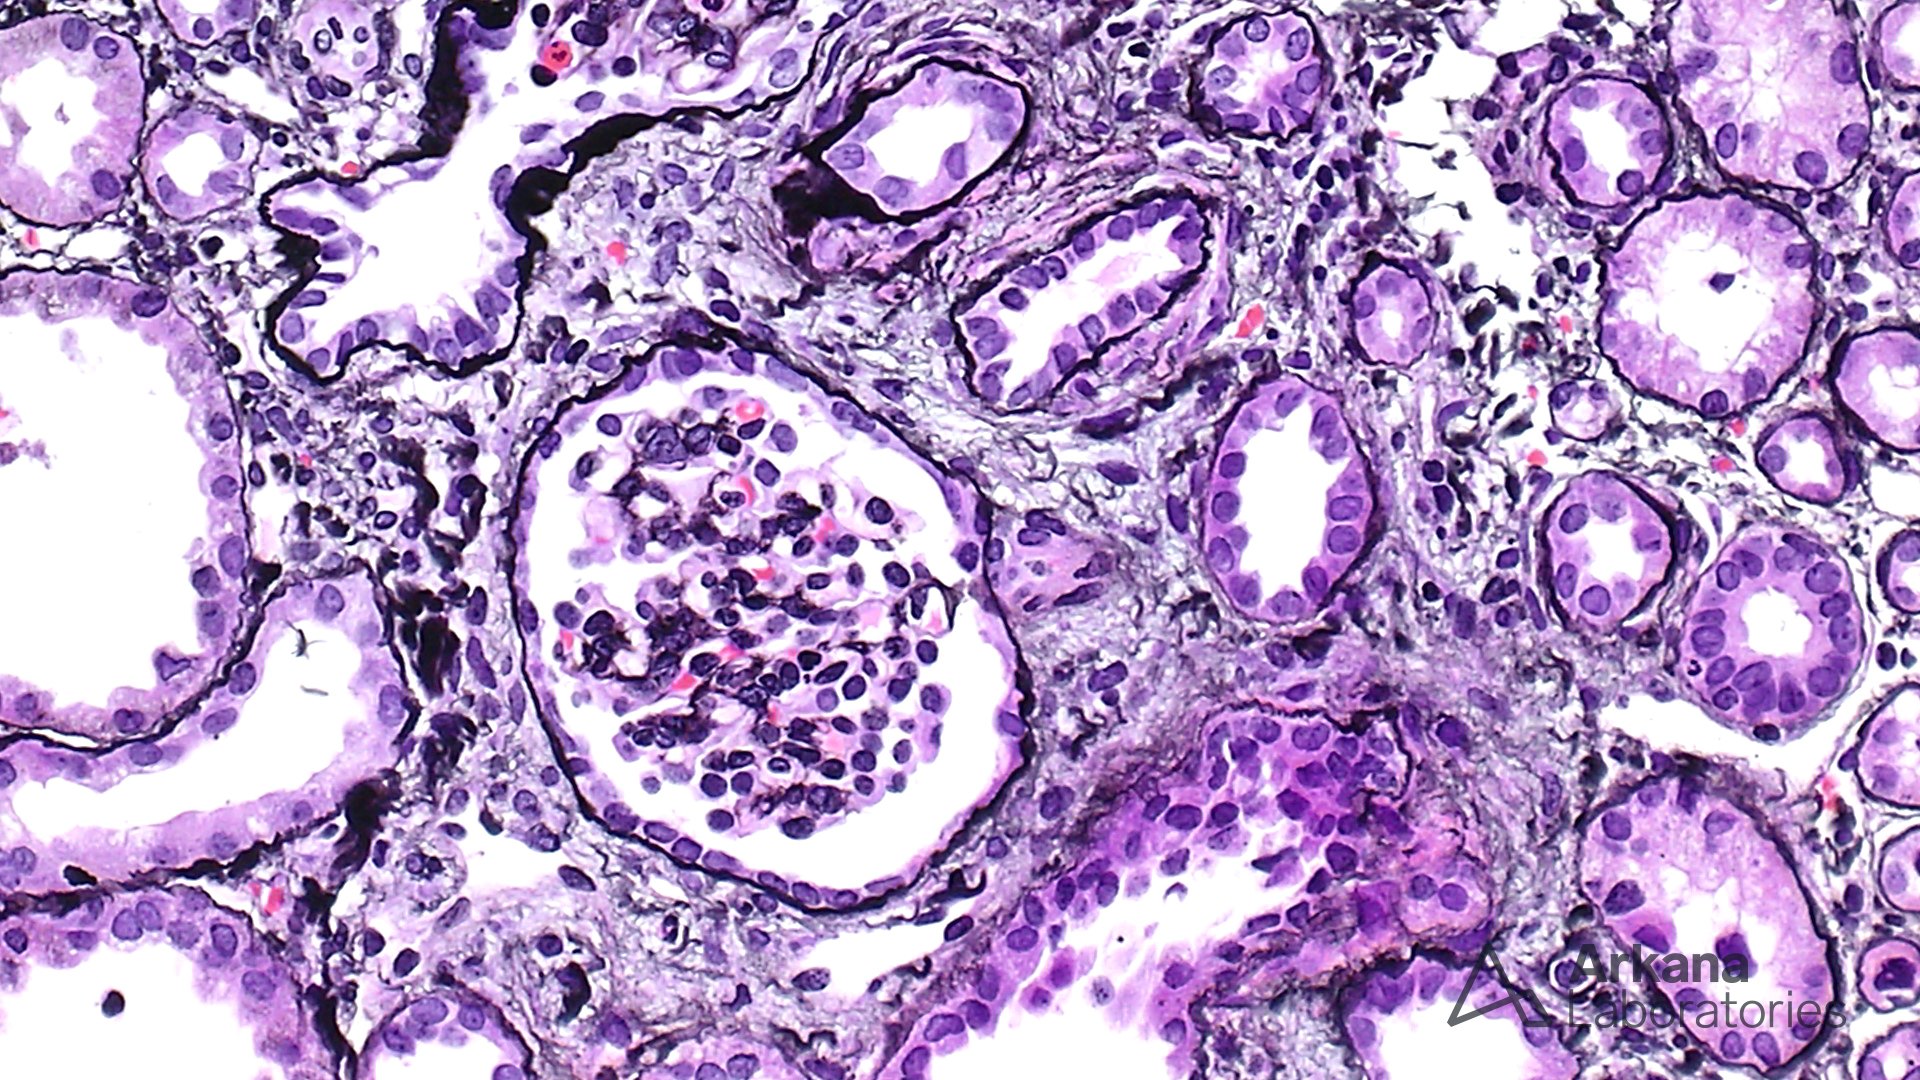 glomerulus in h&e stain